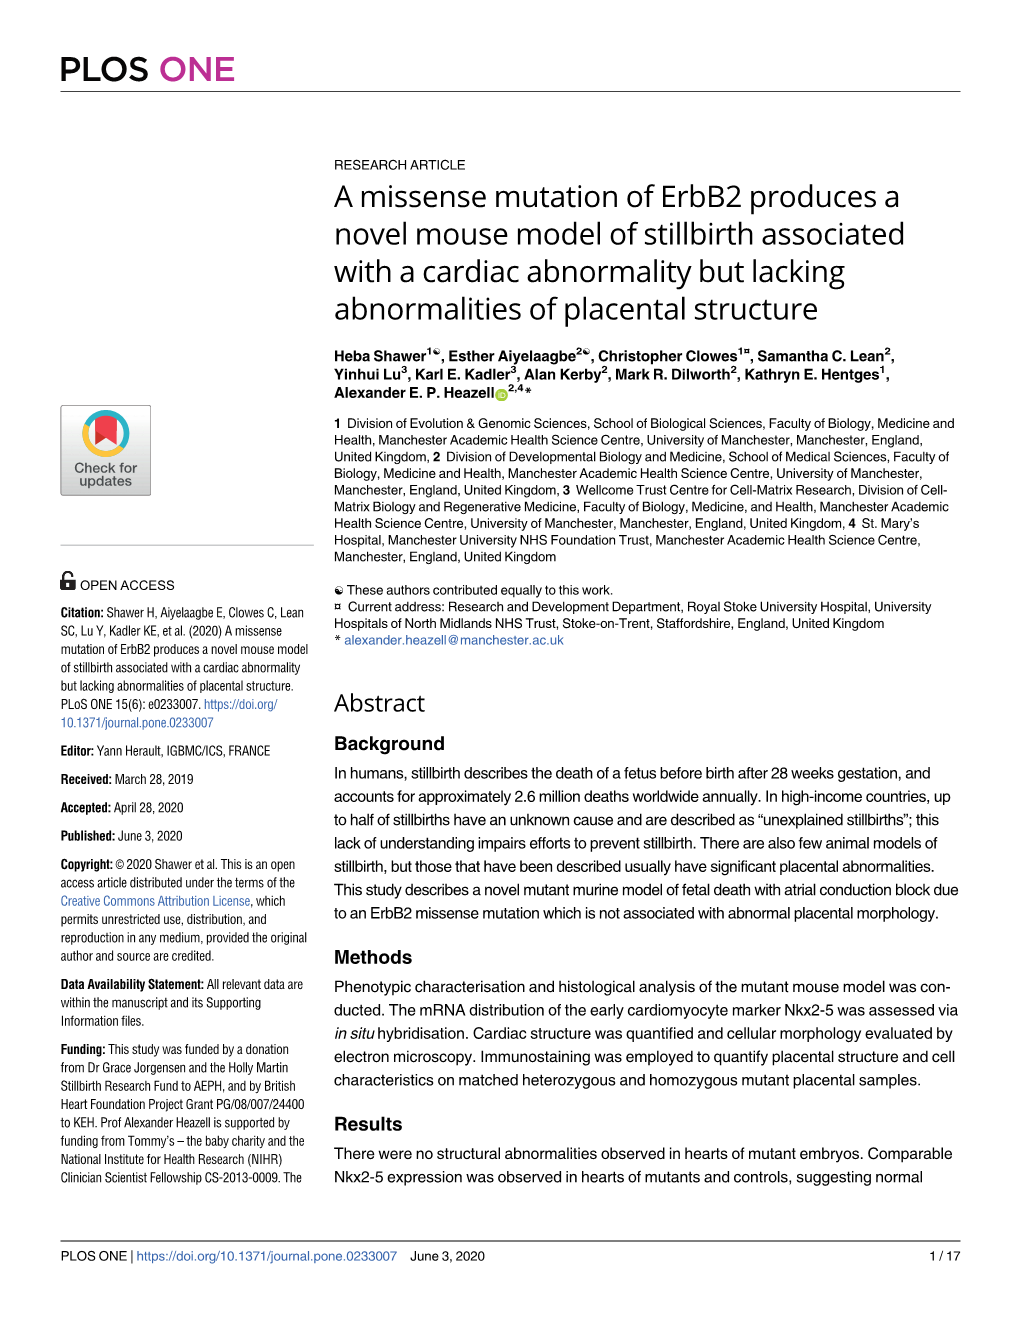 A Missense Mutation of Erbb2 Produces a Novel Mouse Model of Stillbirth Associated with a Cardiac Abnormality but Lacking Abnormalities of Placental Structure